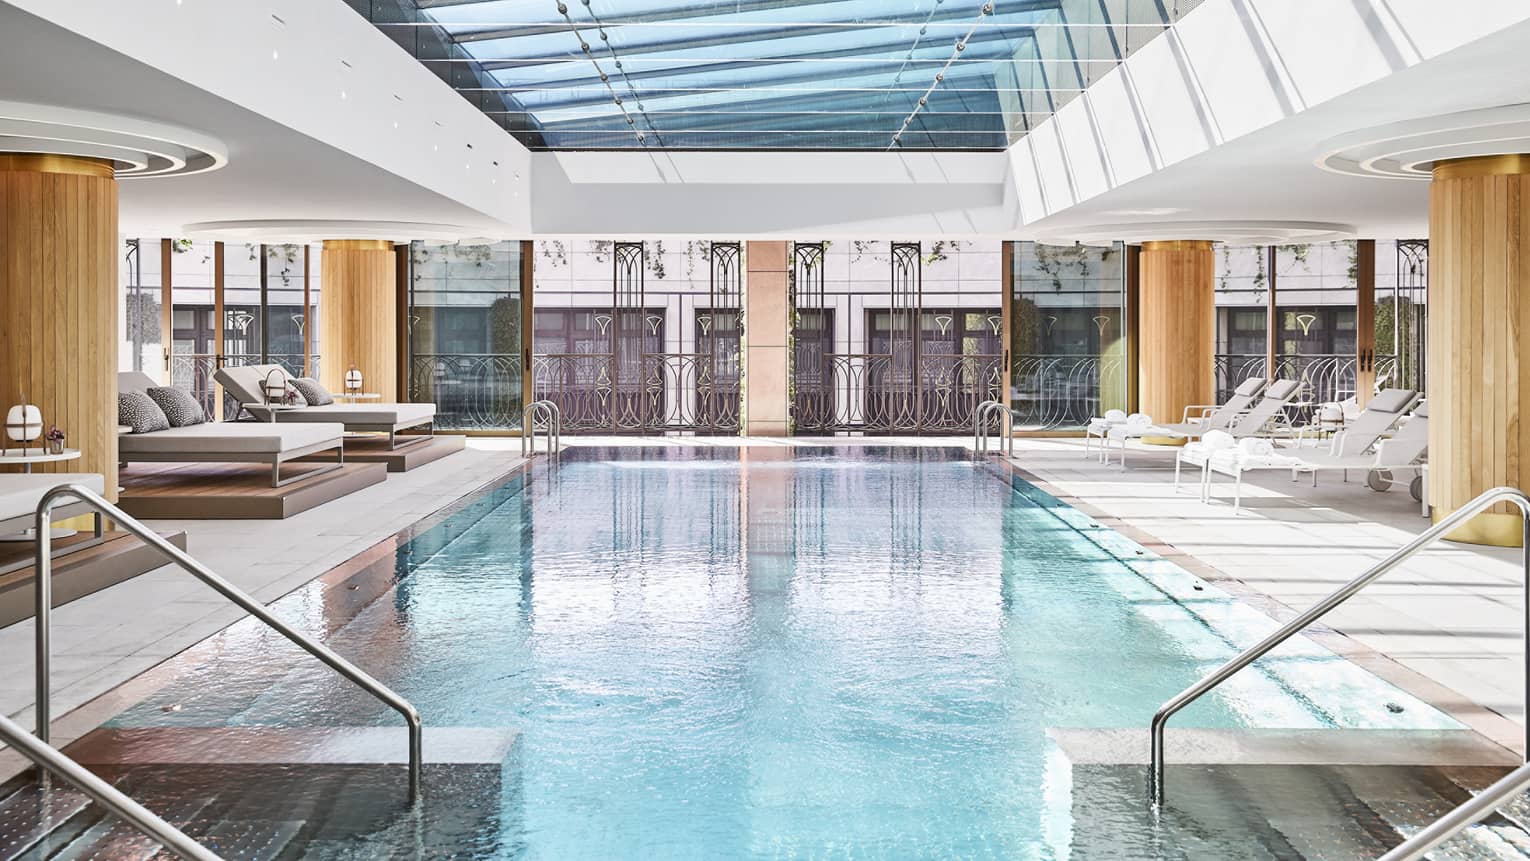 Rectangular indoor pool with two staircases into the pool, glass window ceiling